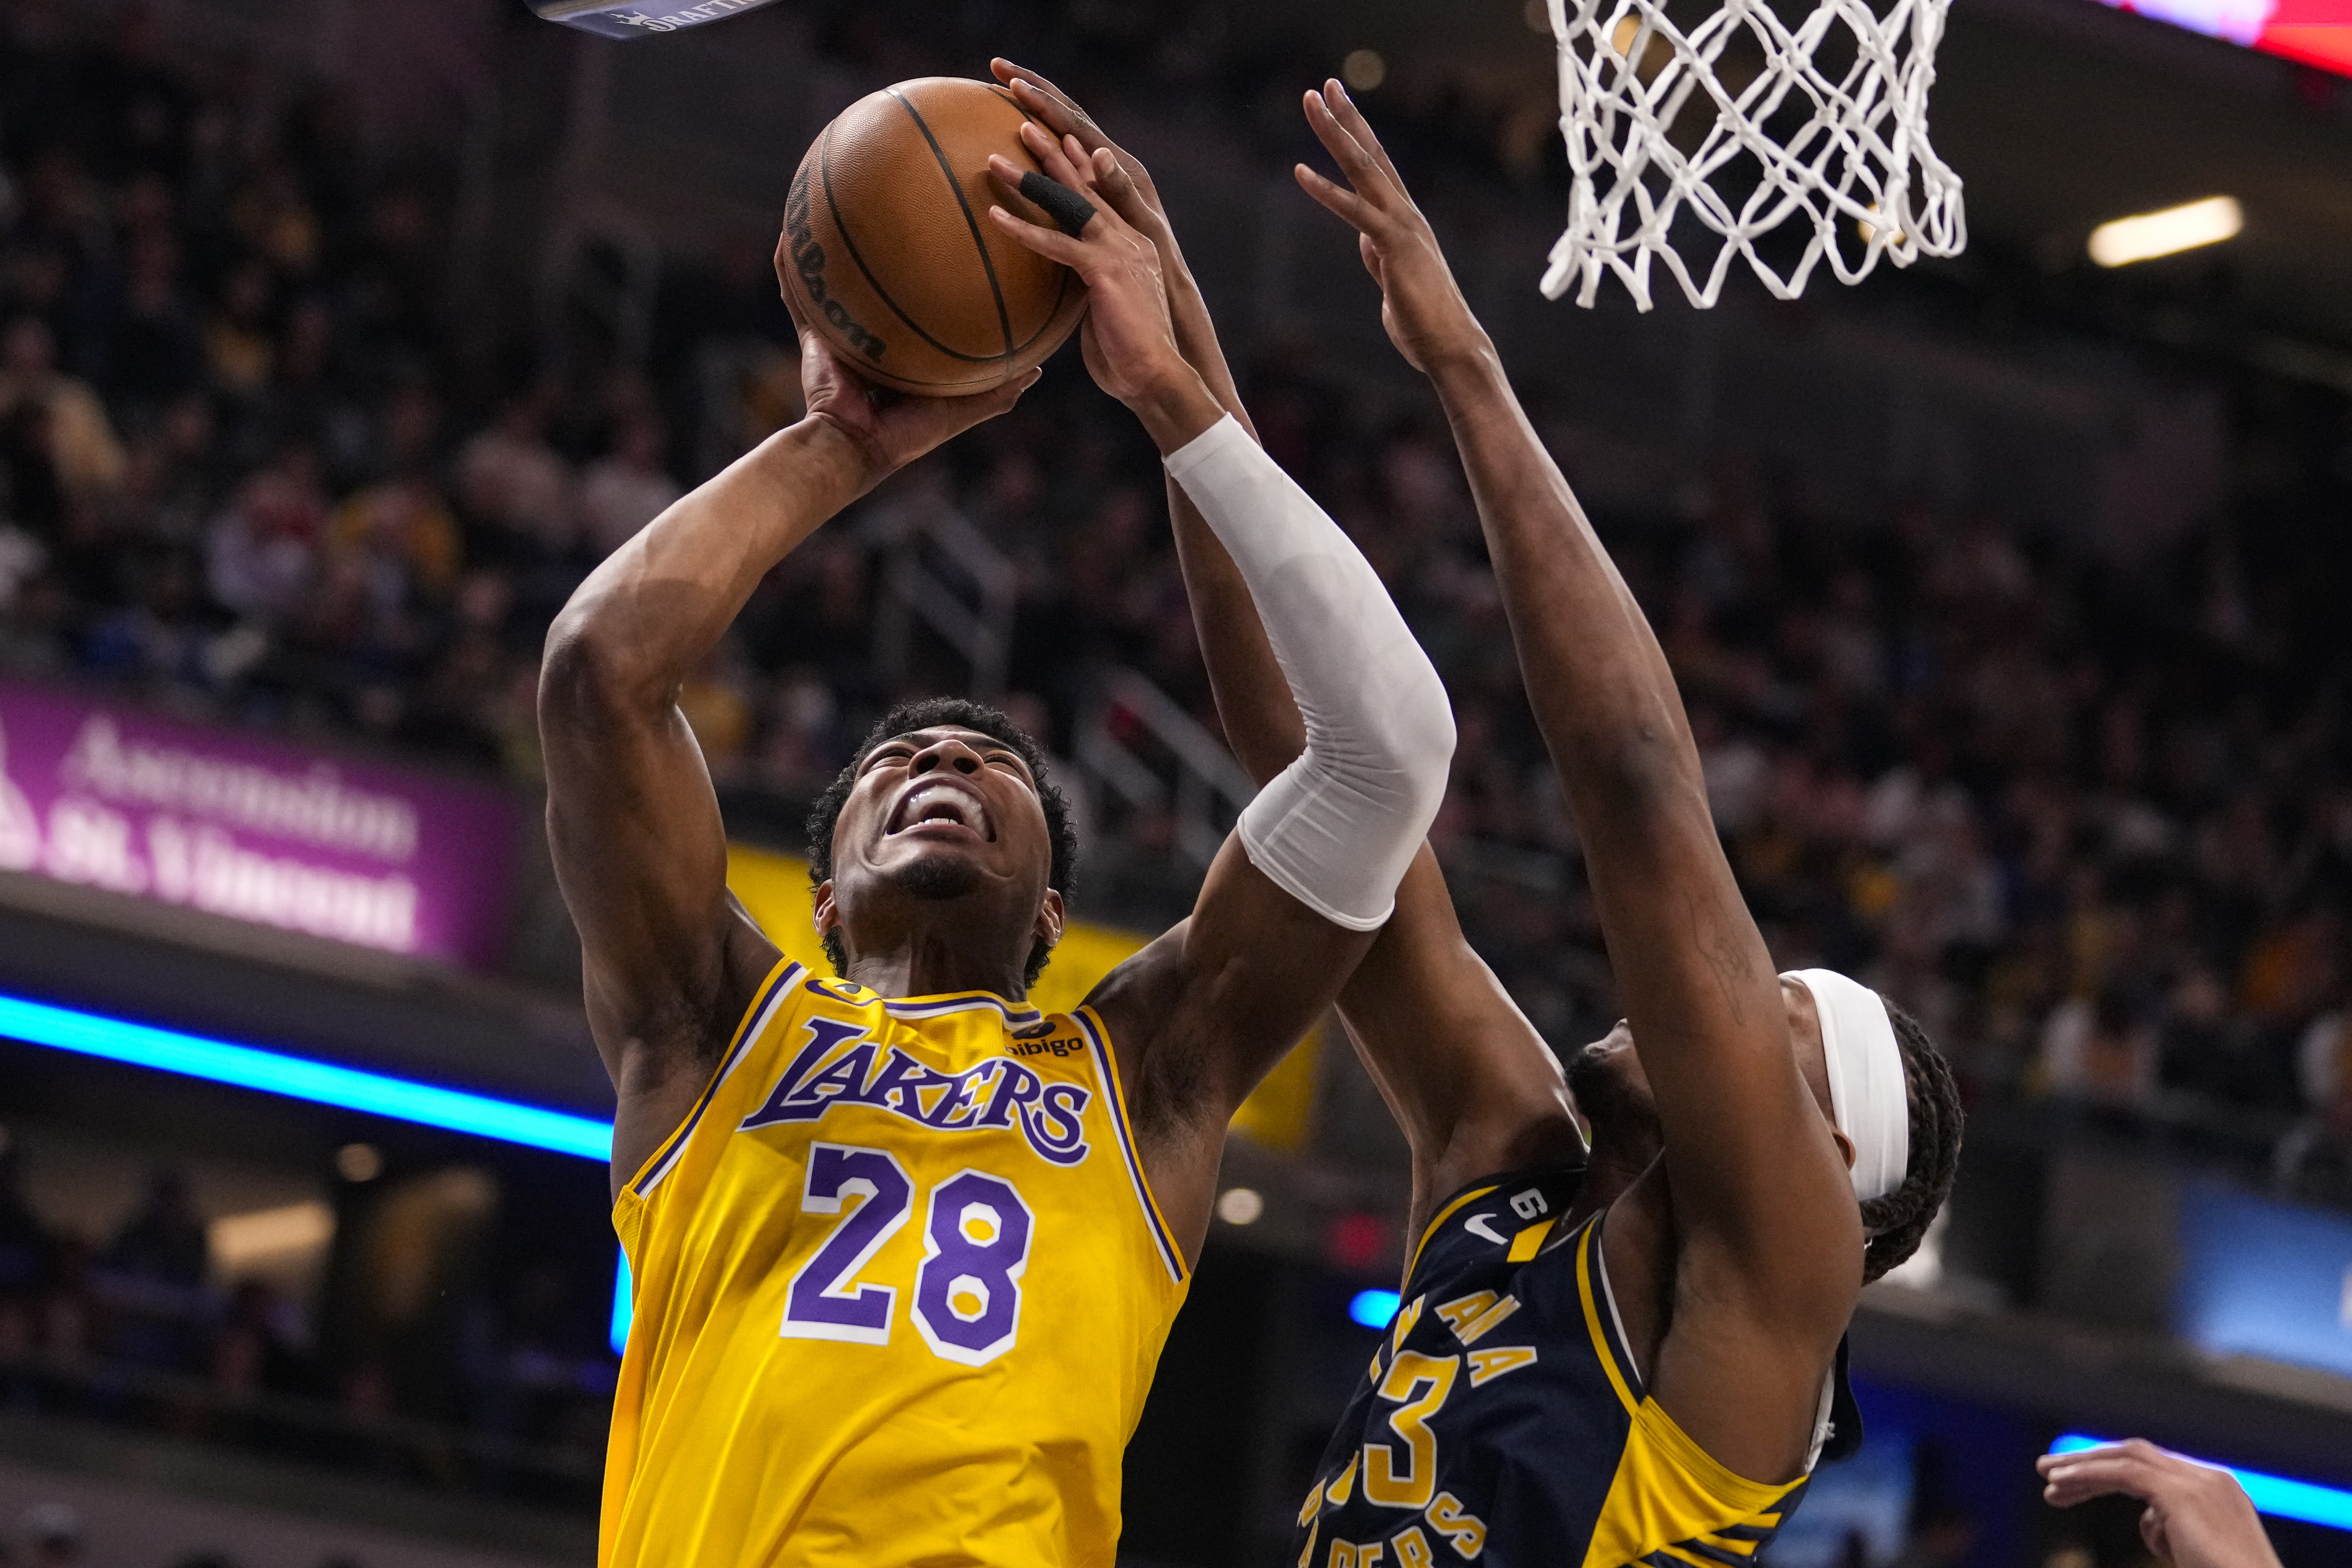 LeBron James closes in on scoring record as Lakers rally past Pacers -  Indianapolis News, Indiana Weather, Indiana Traffic, WISH-TV